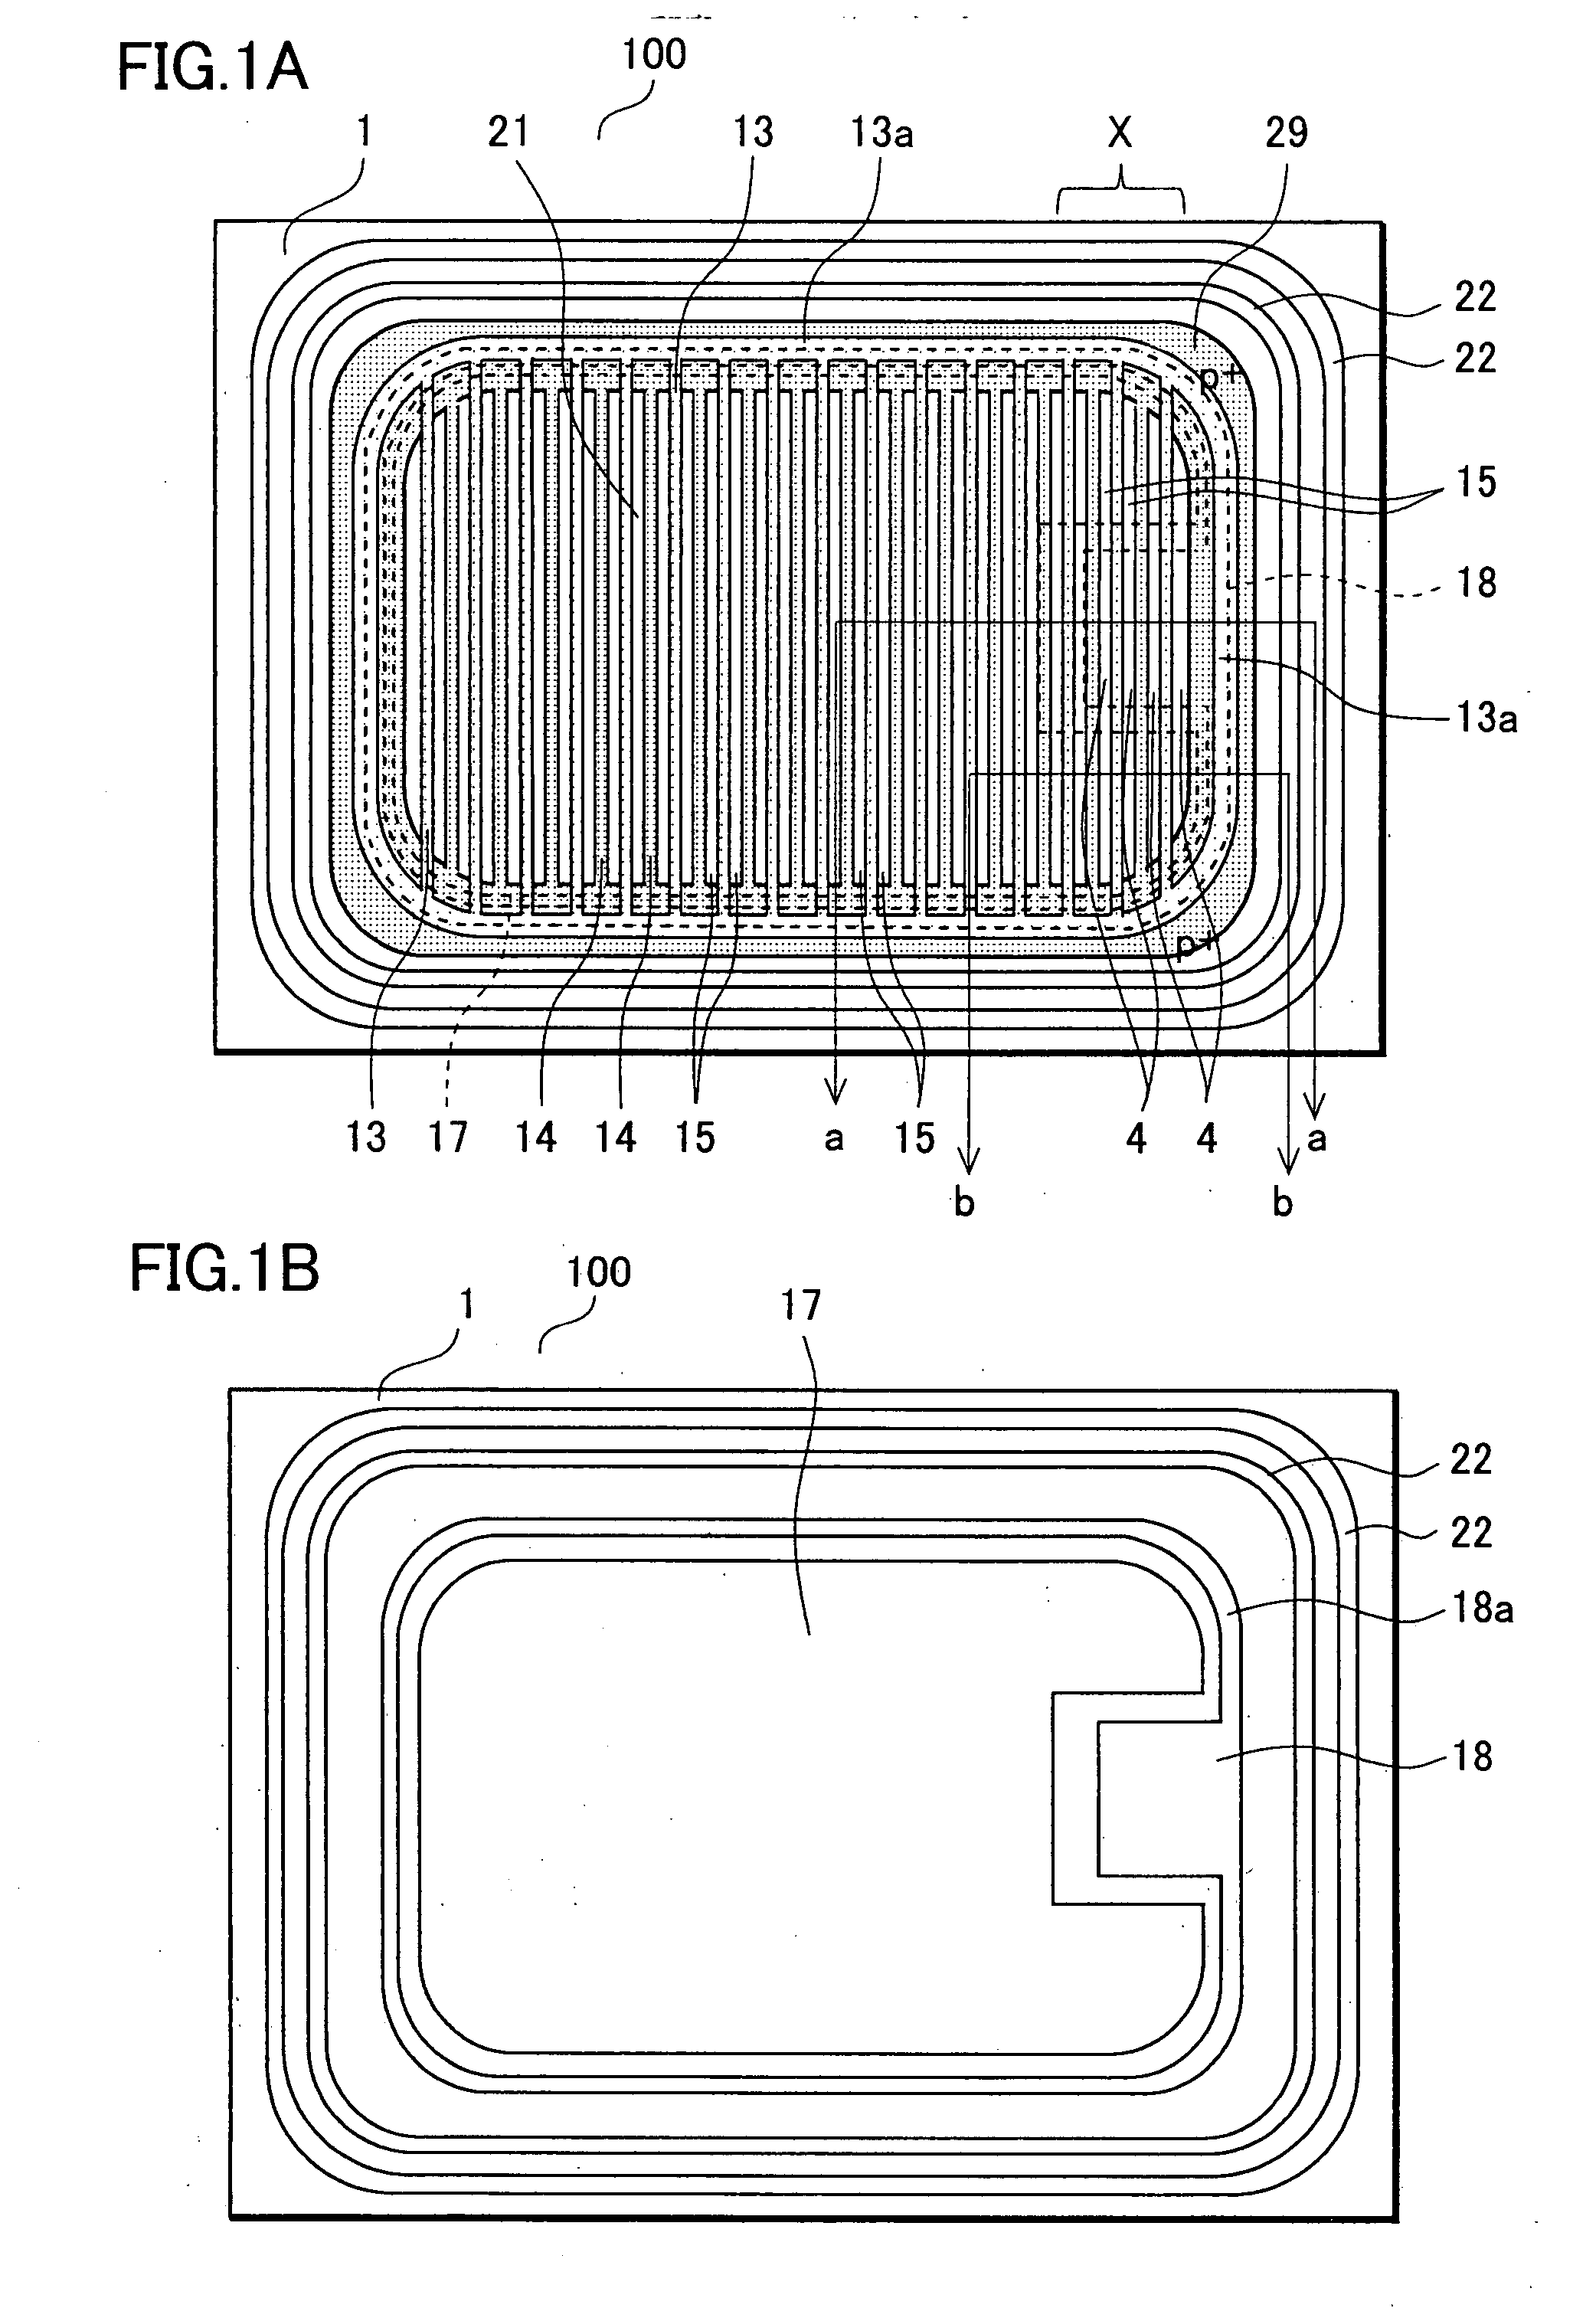 Insulated gate semiconductor device